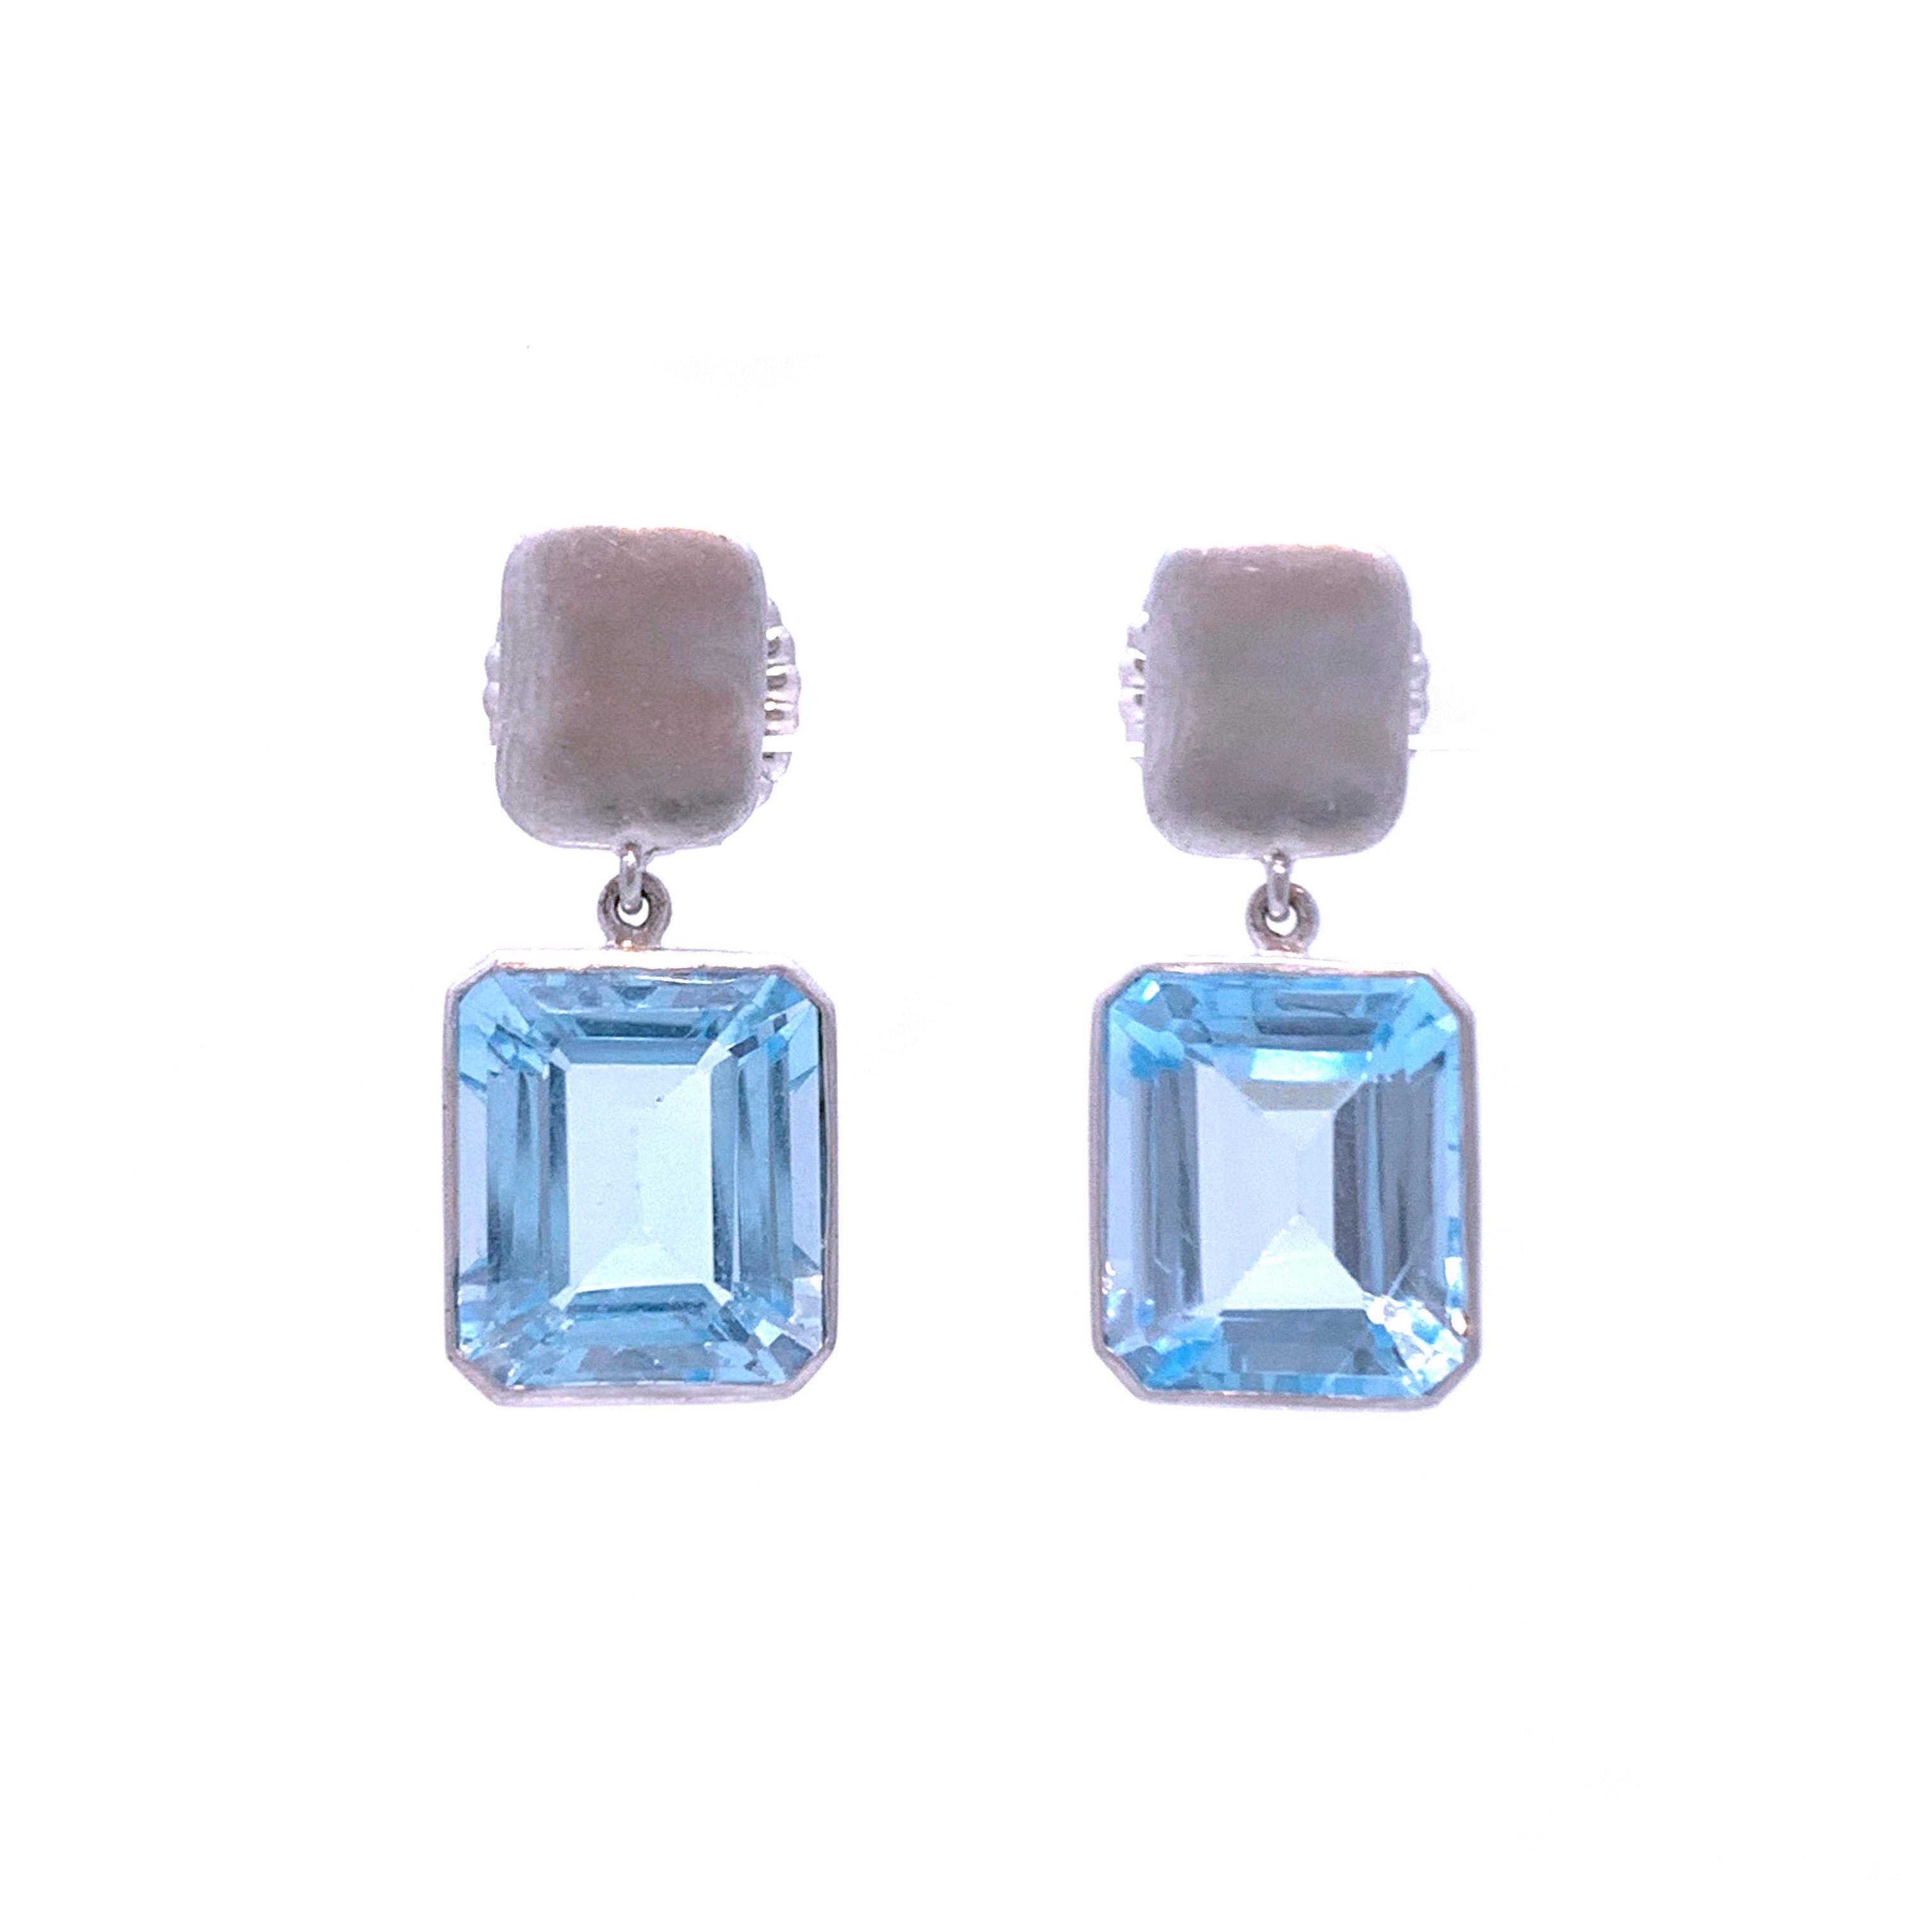 Bijoux Num Emerald-Cut Blue Topaz Drop Earrings

The earrings feature a pair of beautiful emerald-cut blue topaz, handset in platinum plated sterling silver, straight post back with large friction backs.  Top part is a unique in-house design with